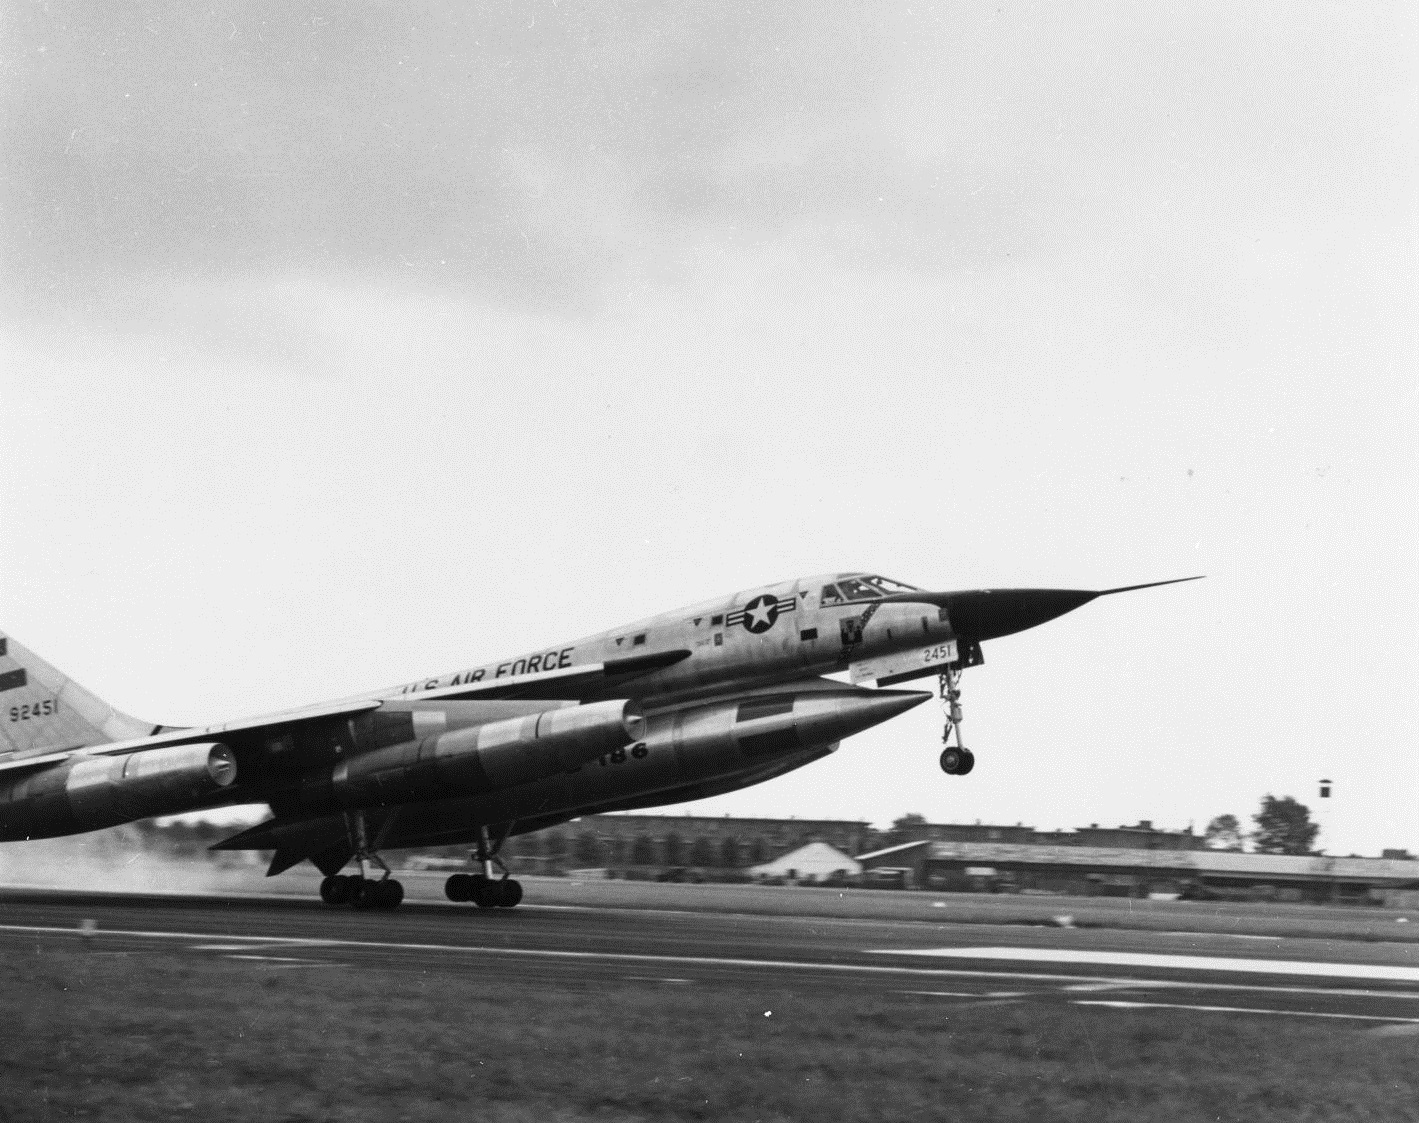 Convair B-58A-10-CF Hustler 59-2451, The Firefly, lands at le Bourget, Paris, after the record-setting transatlantic flight, 26 May 1961. (University of North Texas Libraries) 